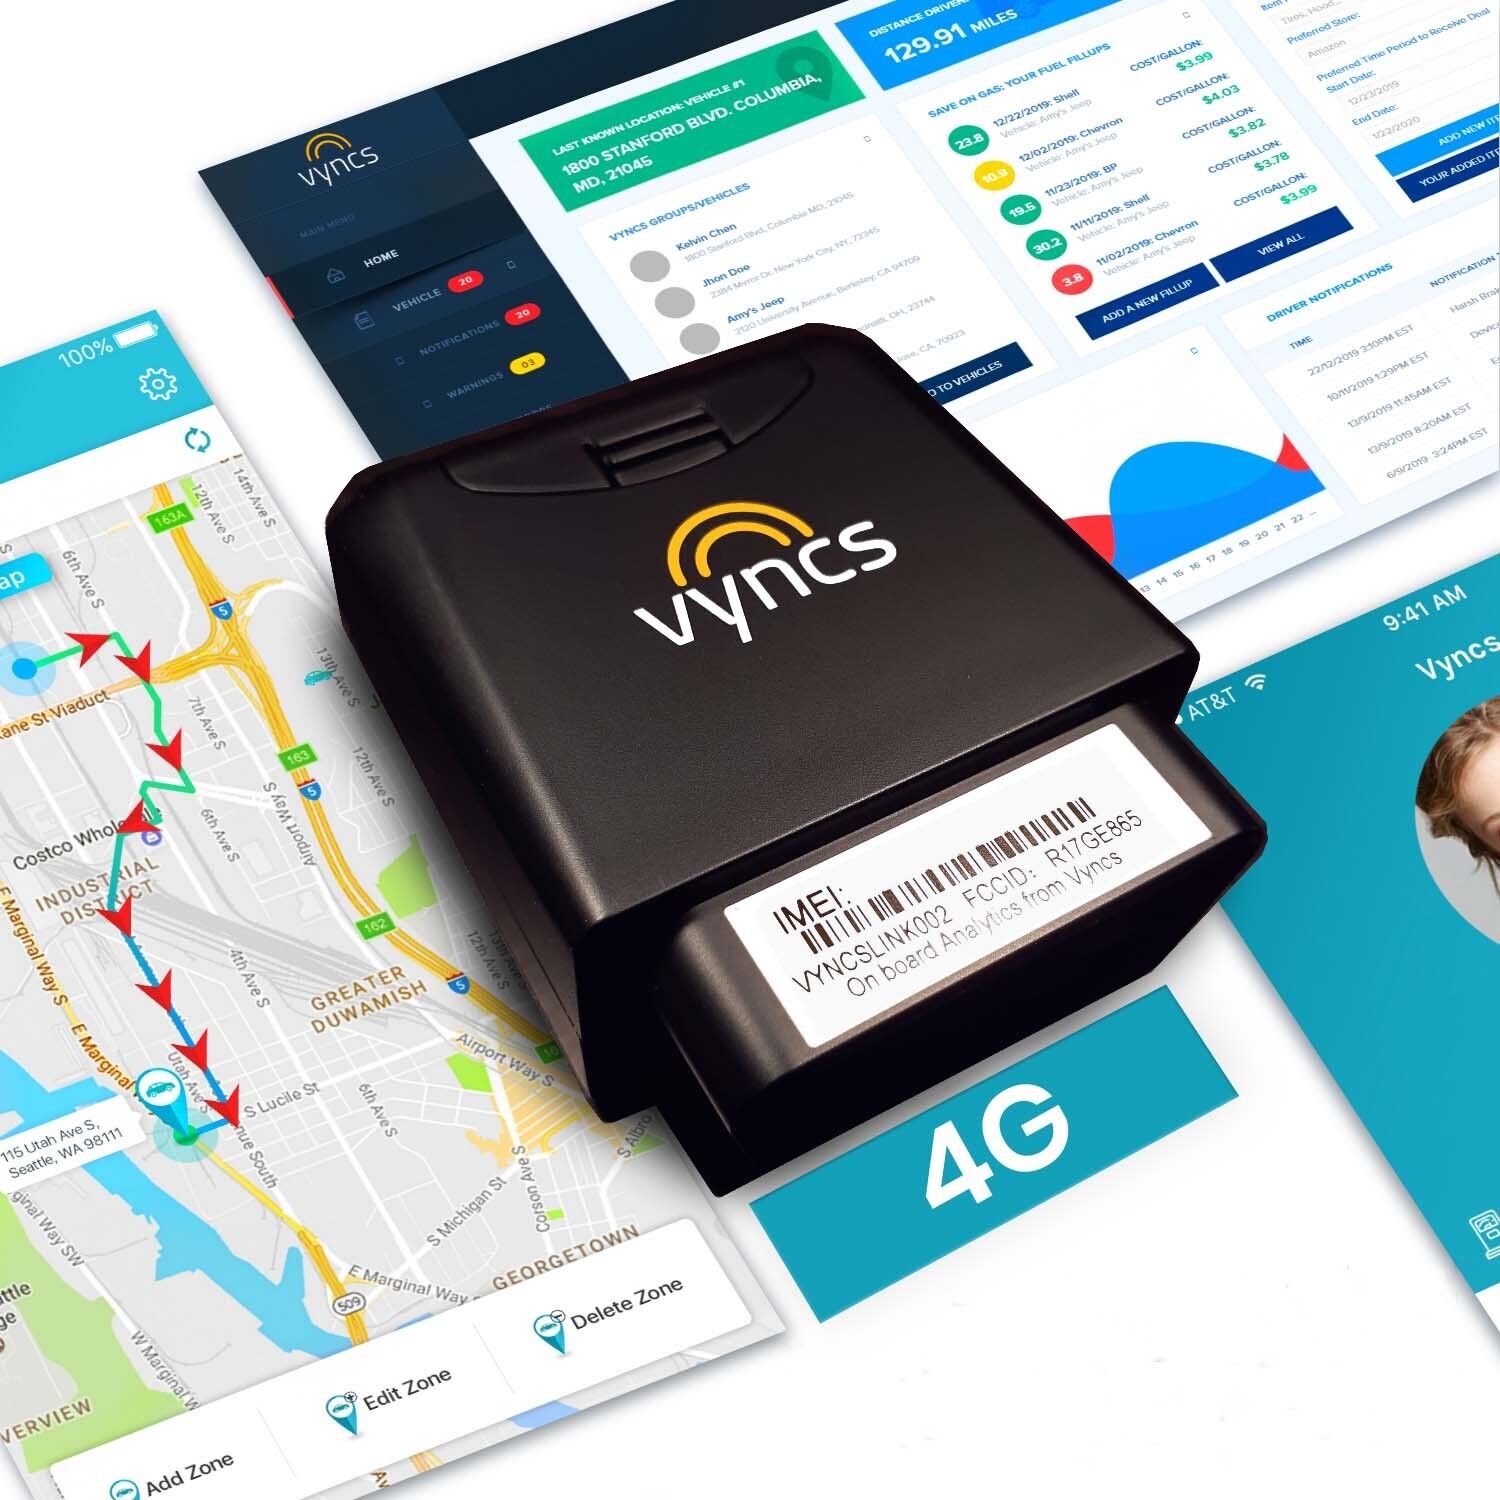 Vyncs - GPS Tracker for Vehicles 4G, No Monthly Fee, Vehicle Location, Trip History, Driving Alerts, GeoFence, Fuel Economy, OBD Fault Codes, USA-Developed, Family or Fleets, Activation Fee Required - image 1 of 7